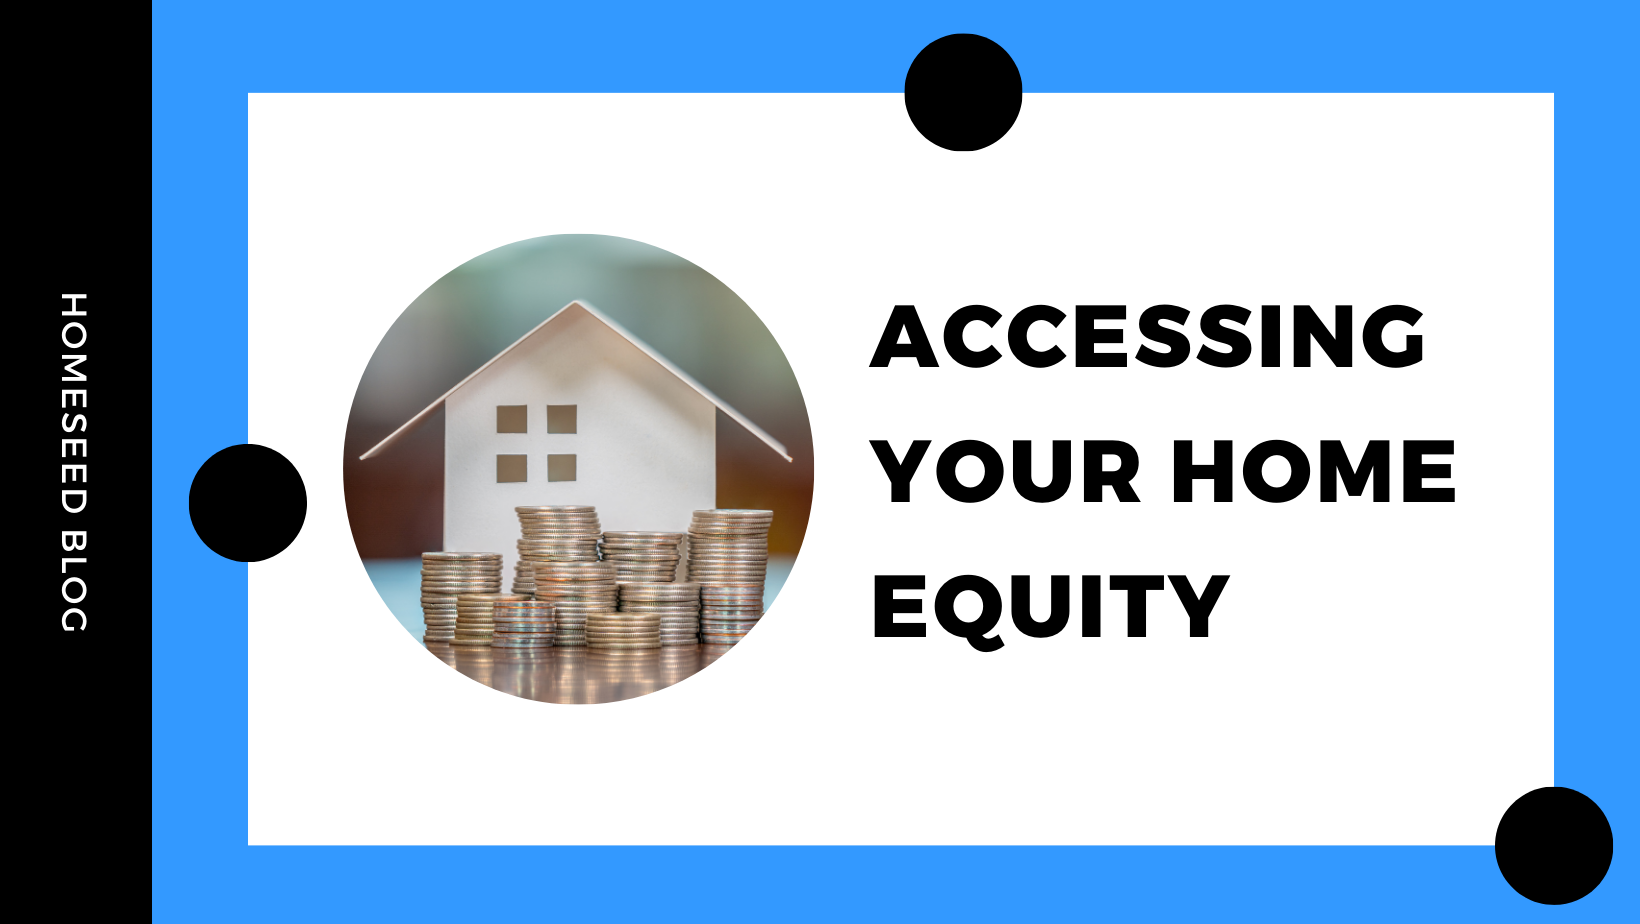 Accessing Your Home Equity